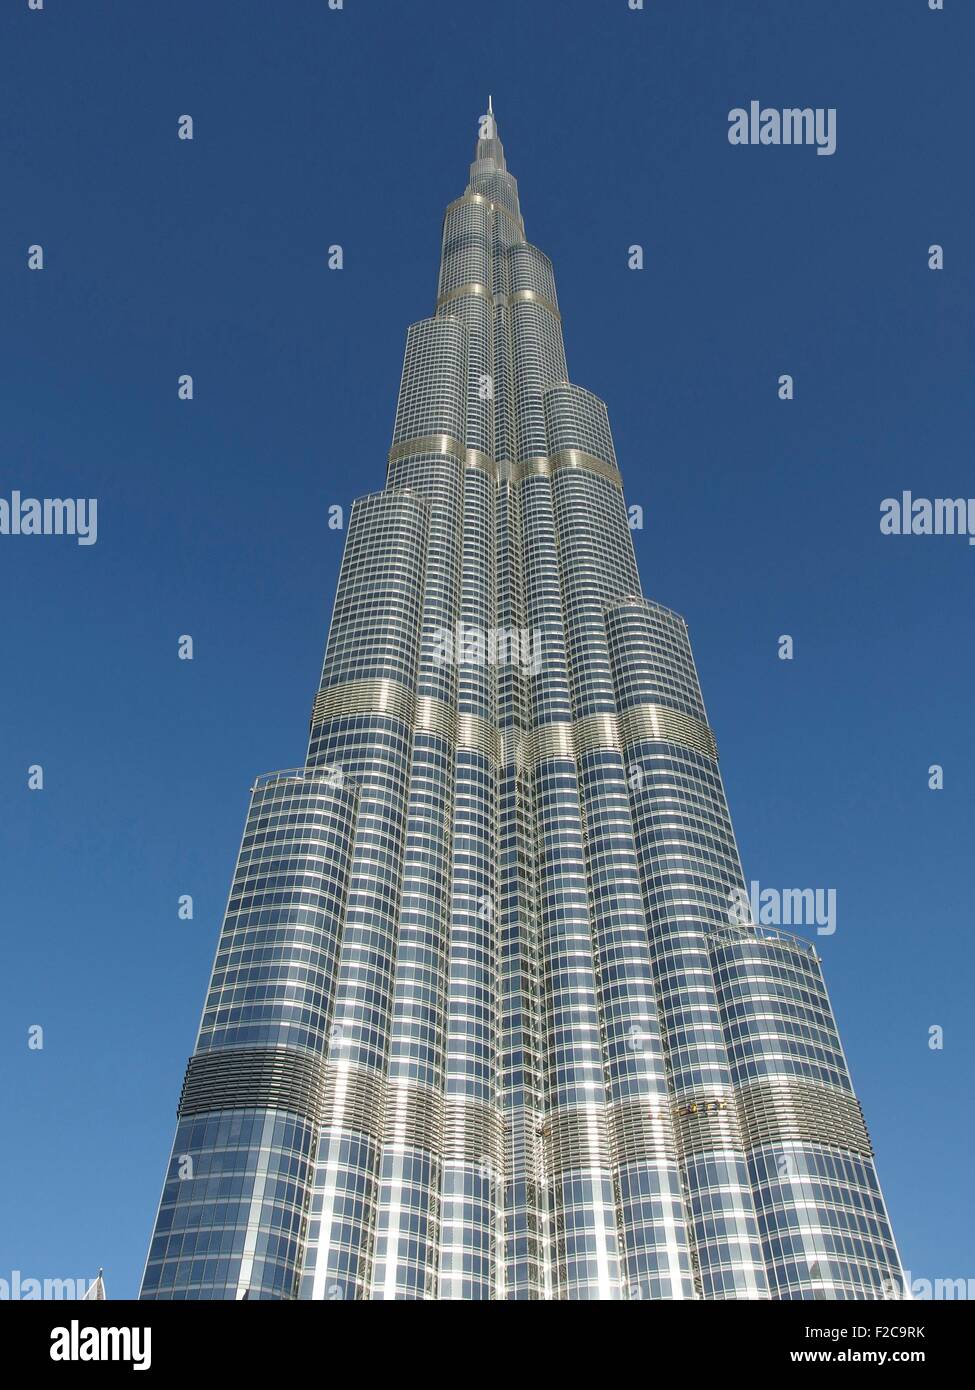 The Burj Khalifa tower a megatall skyscraper in Dubai, United Arab Emirates. It is the tallest artificial structure in the world, standing 829.8 m (2,722 ft). Stock Photo